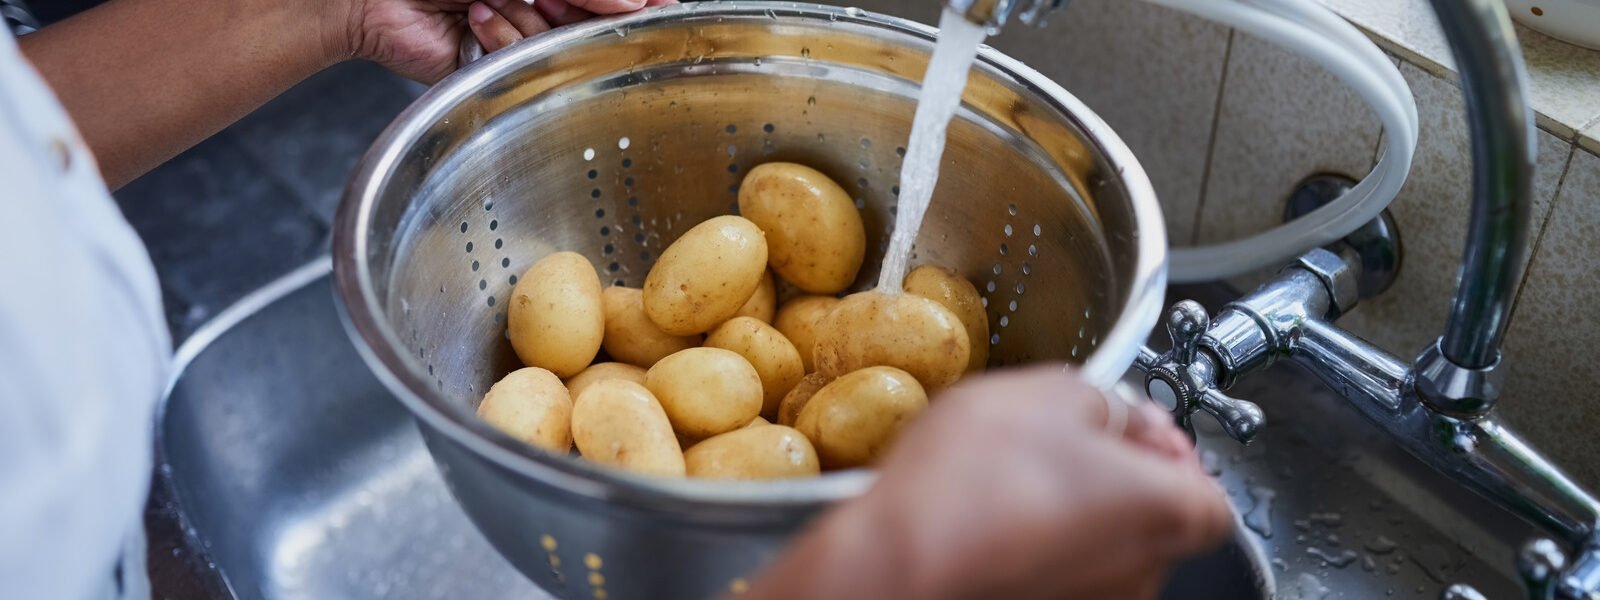 Potatoes Have An Unexpected Amount Of Protein - Health Digest